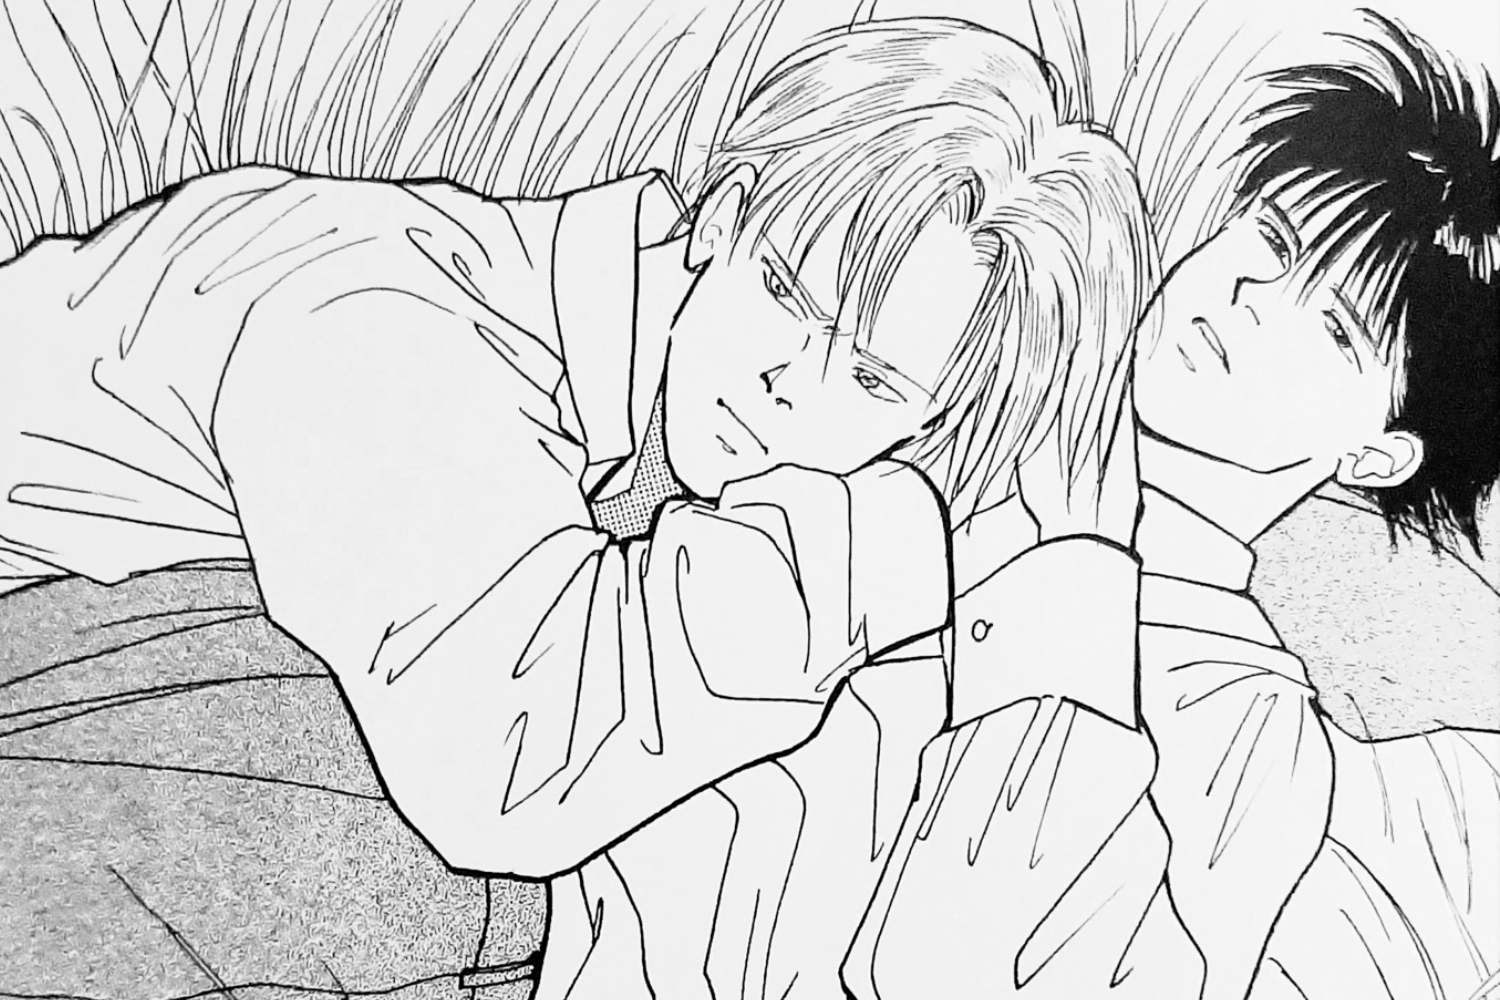 Two boys together clinging: Queer male intimacy and 'Banana Fish'